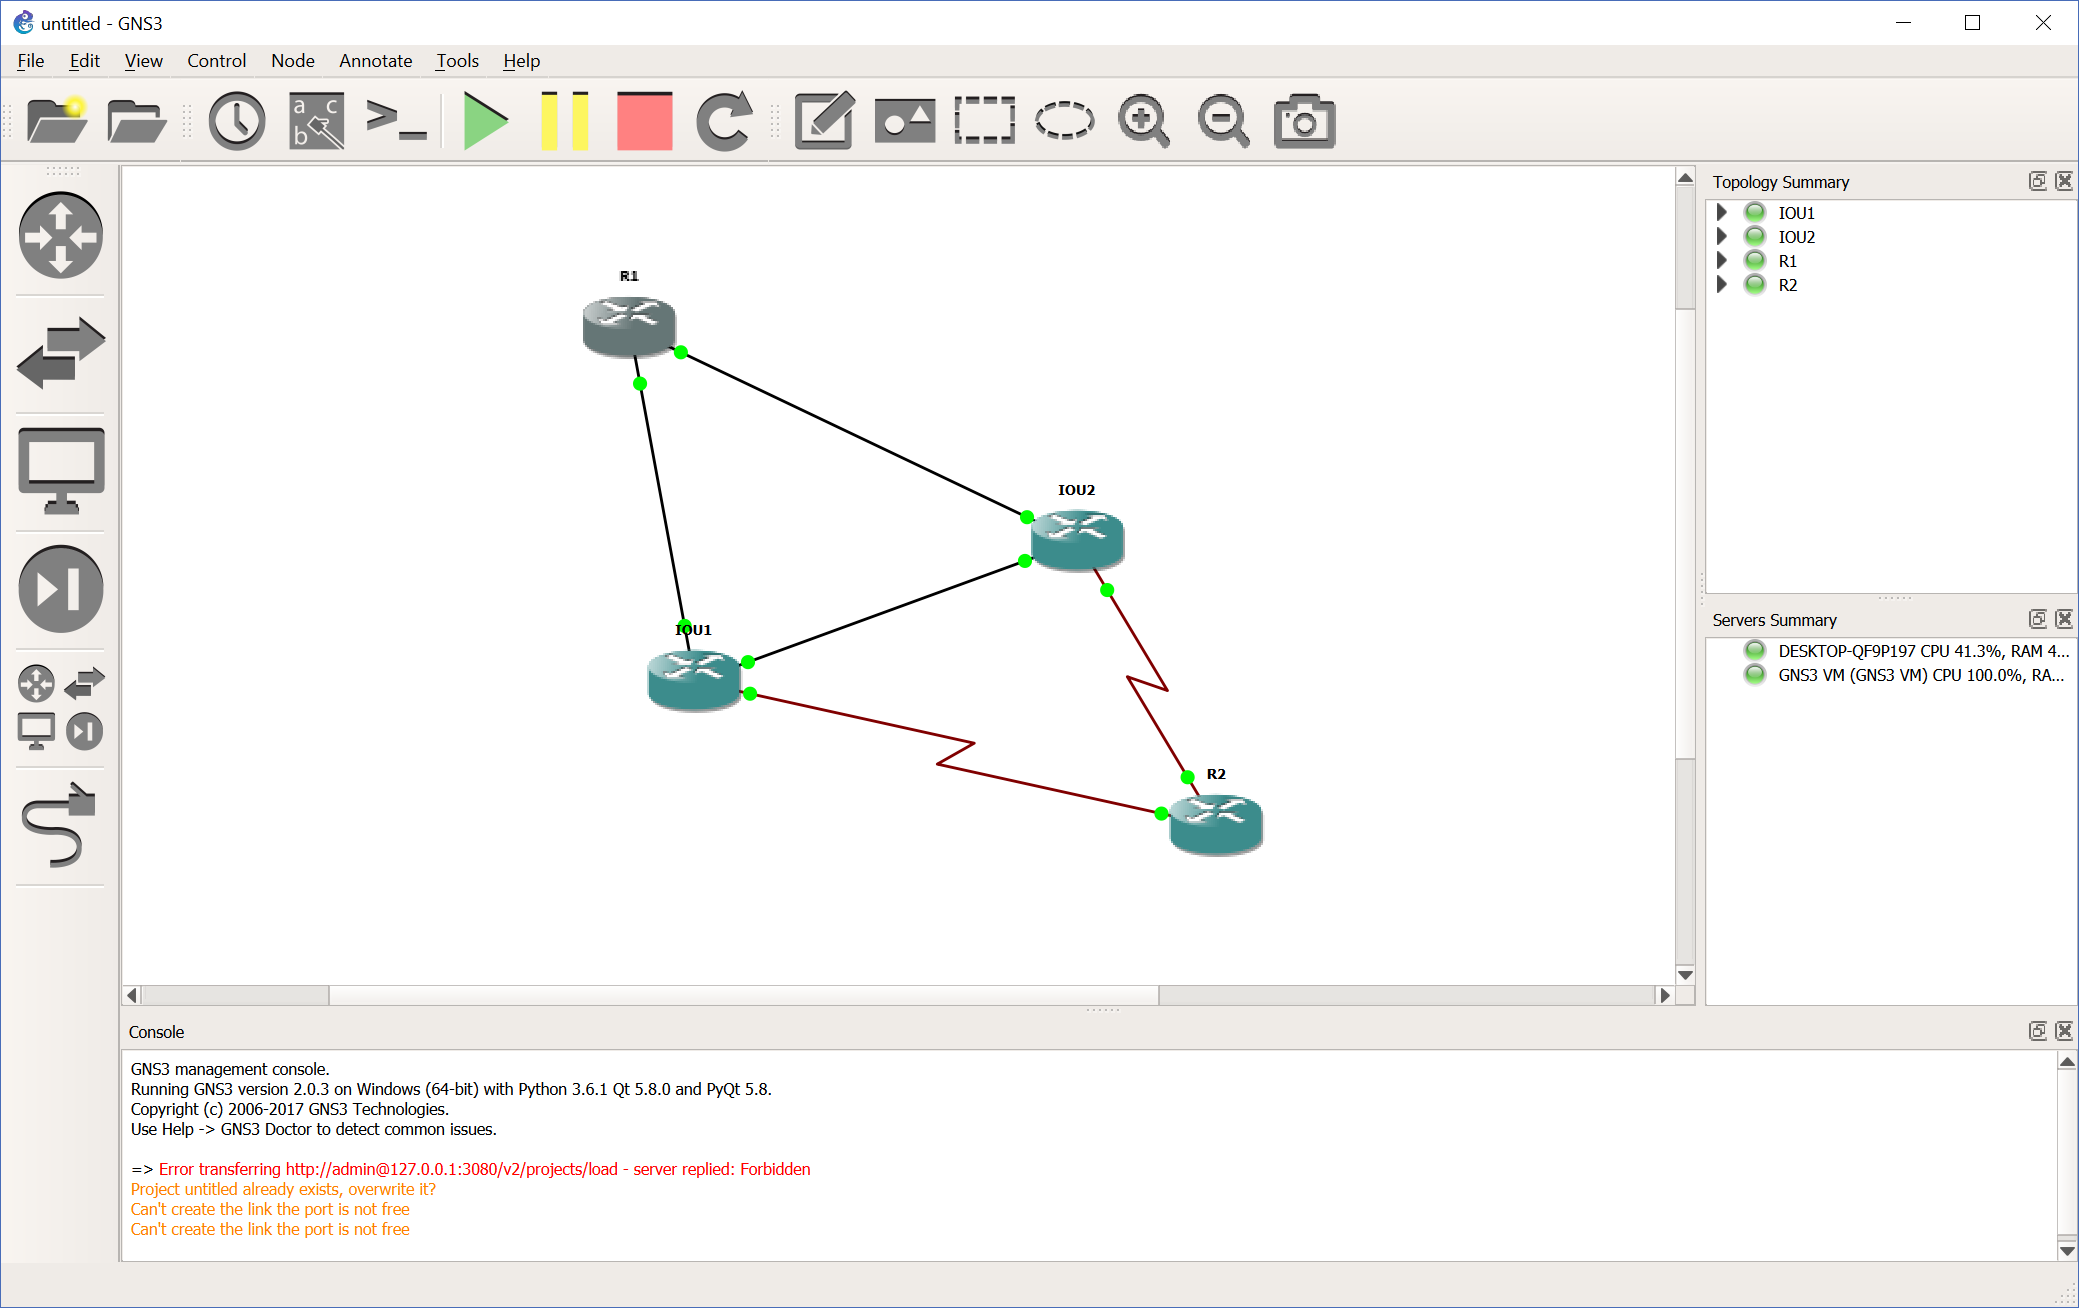 GNS3 is a powerful tool every network engineer needs to test network topologies